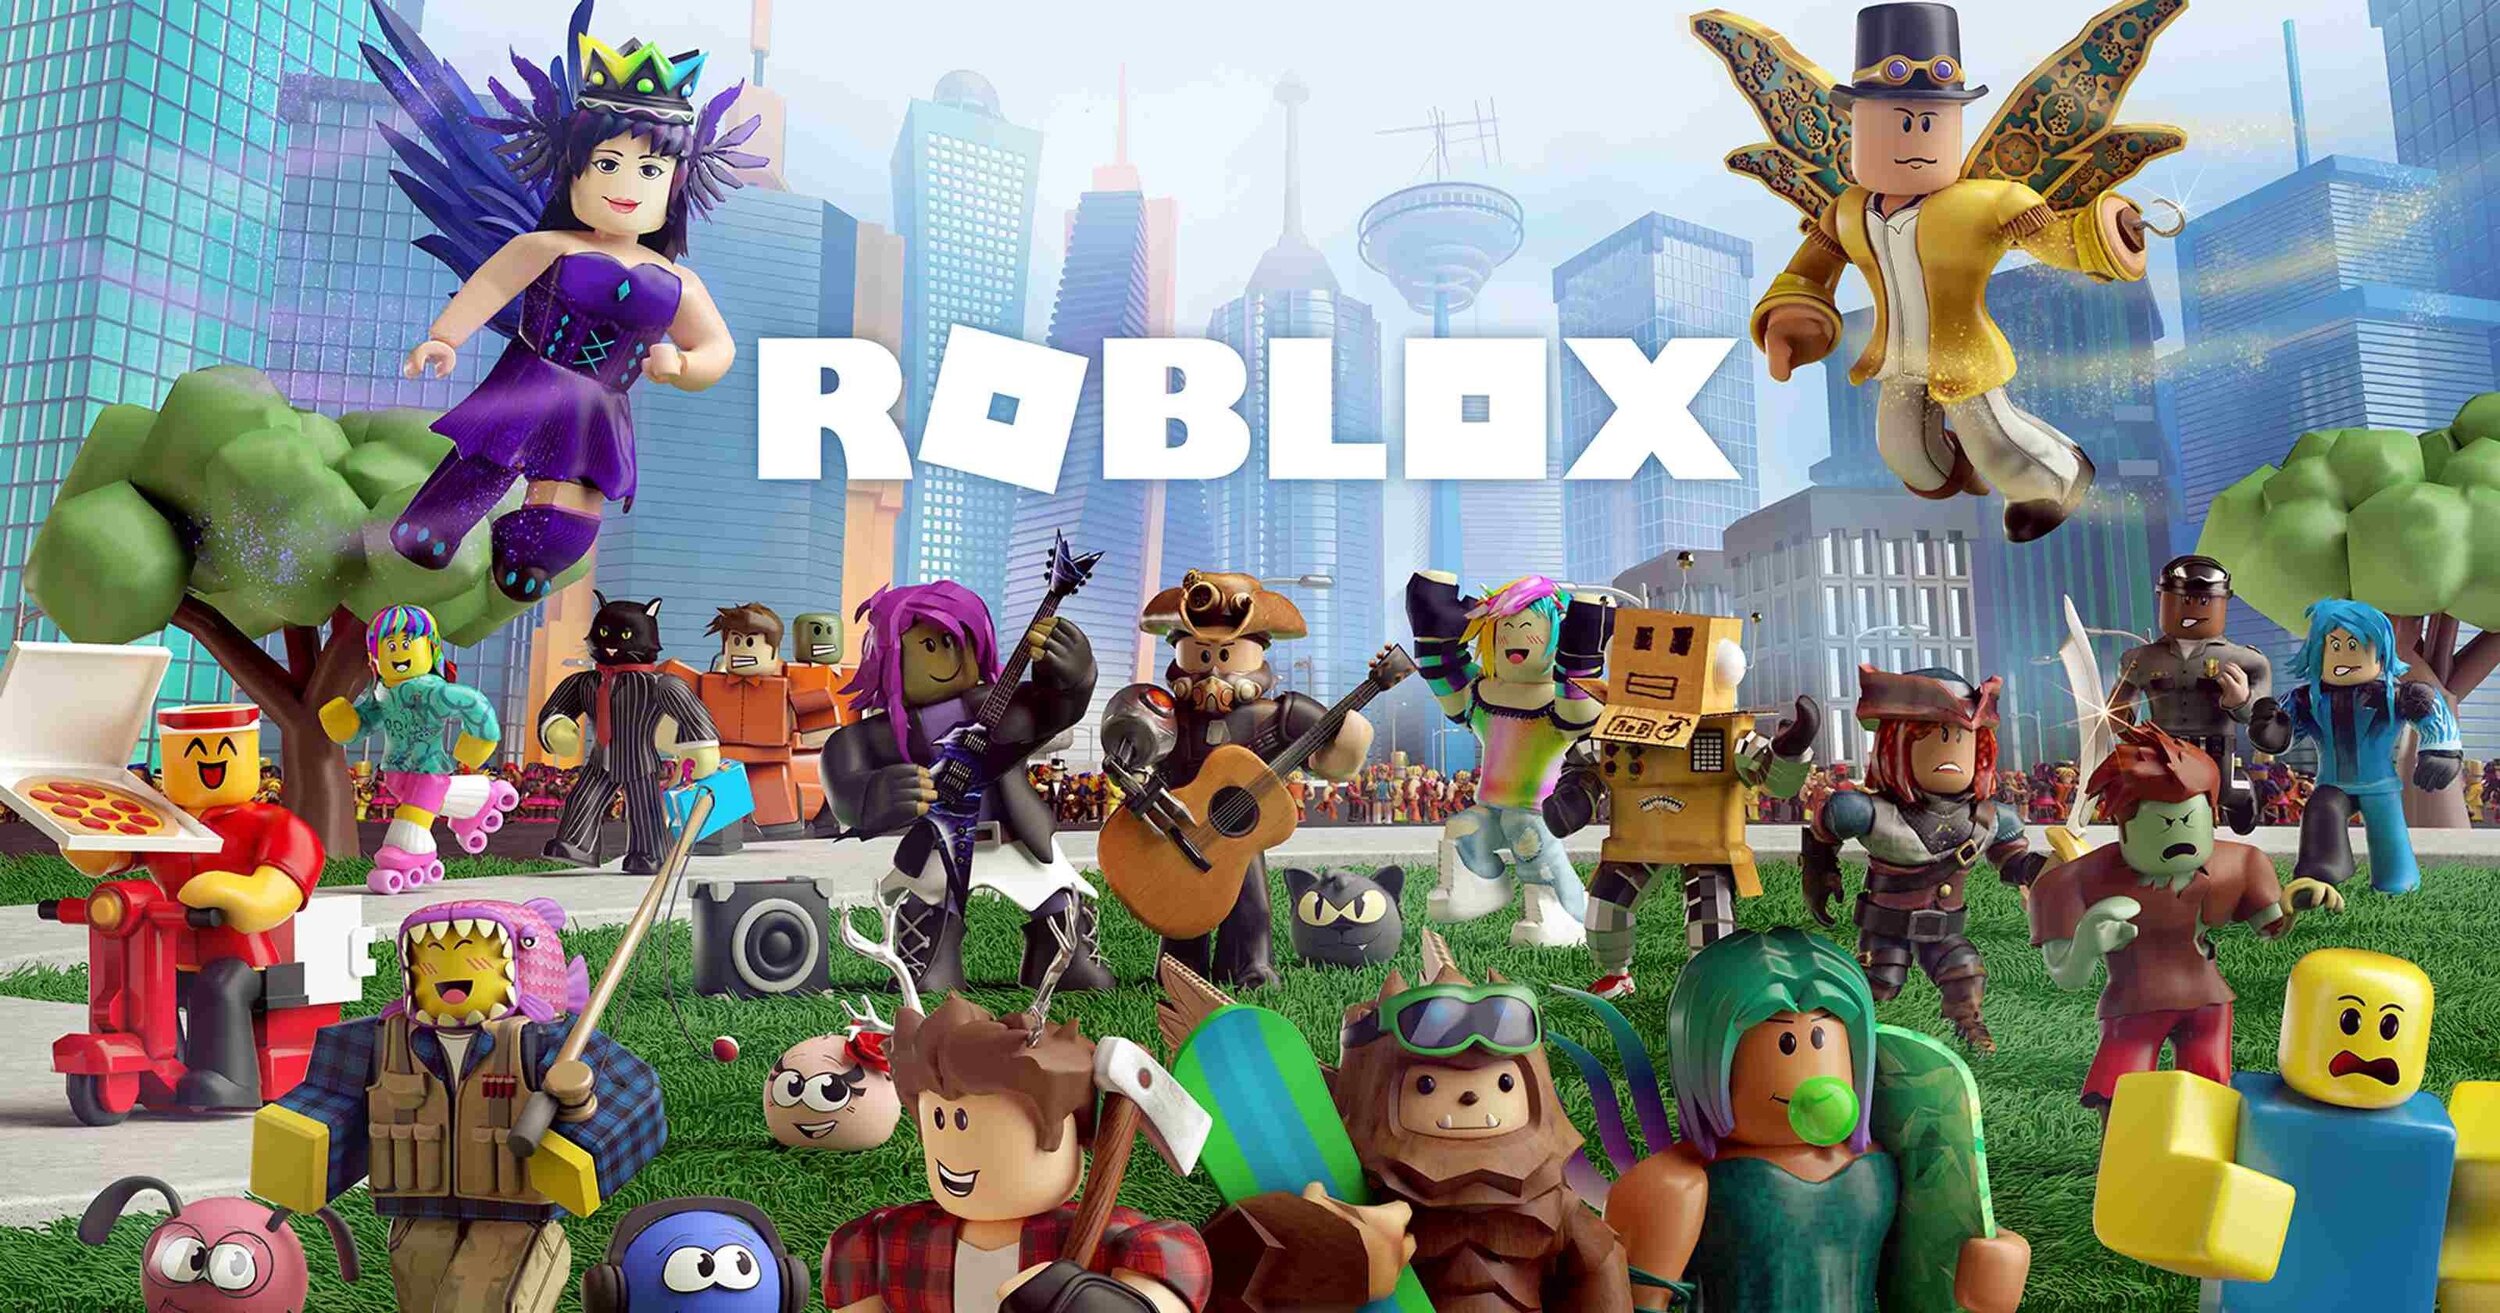 Roblox reverses course and aims to go public via a direct listing